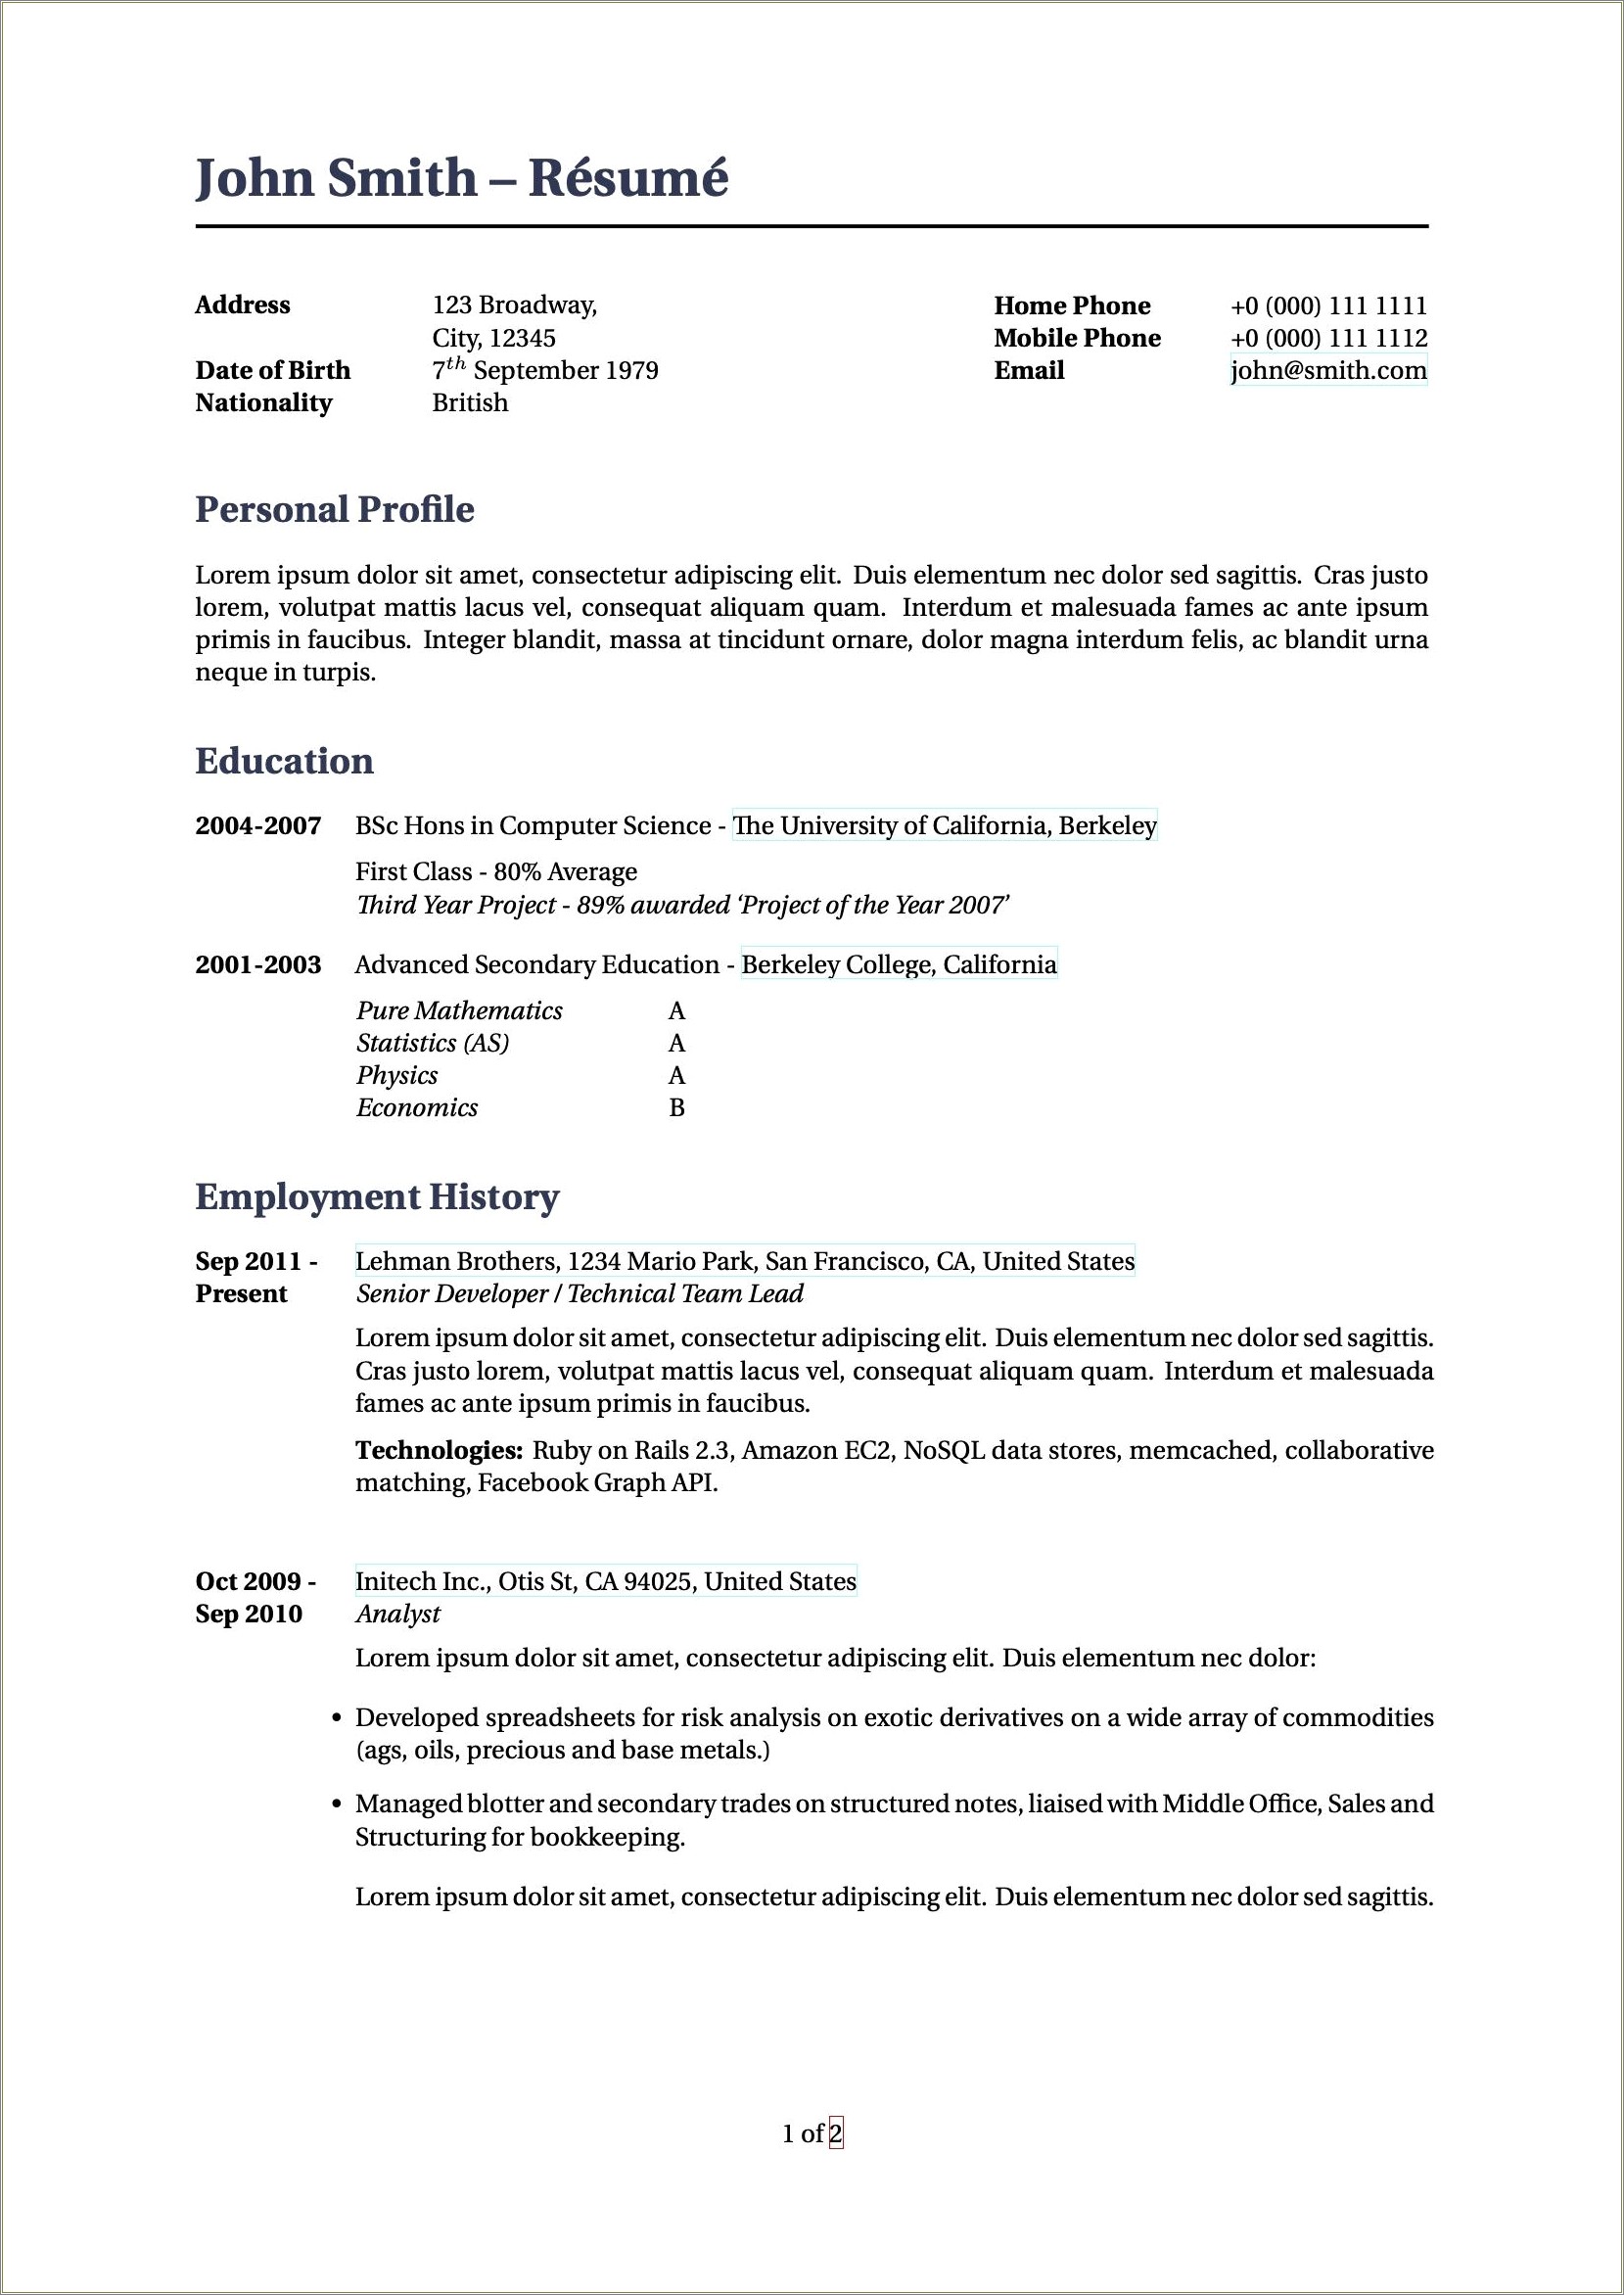 Resume Format For 1.5 Years Experience